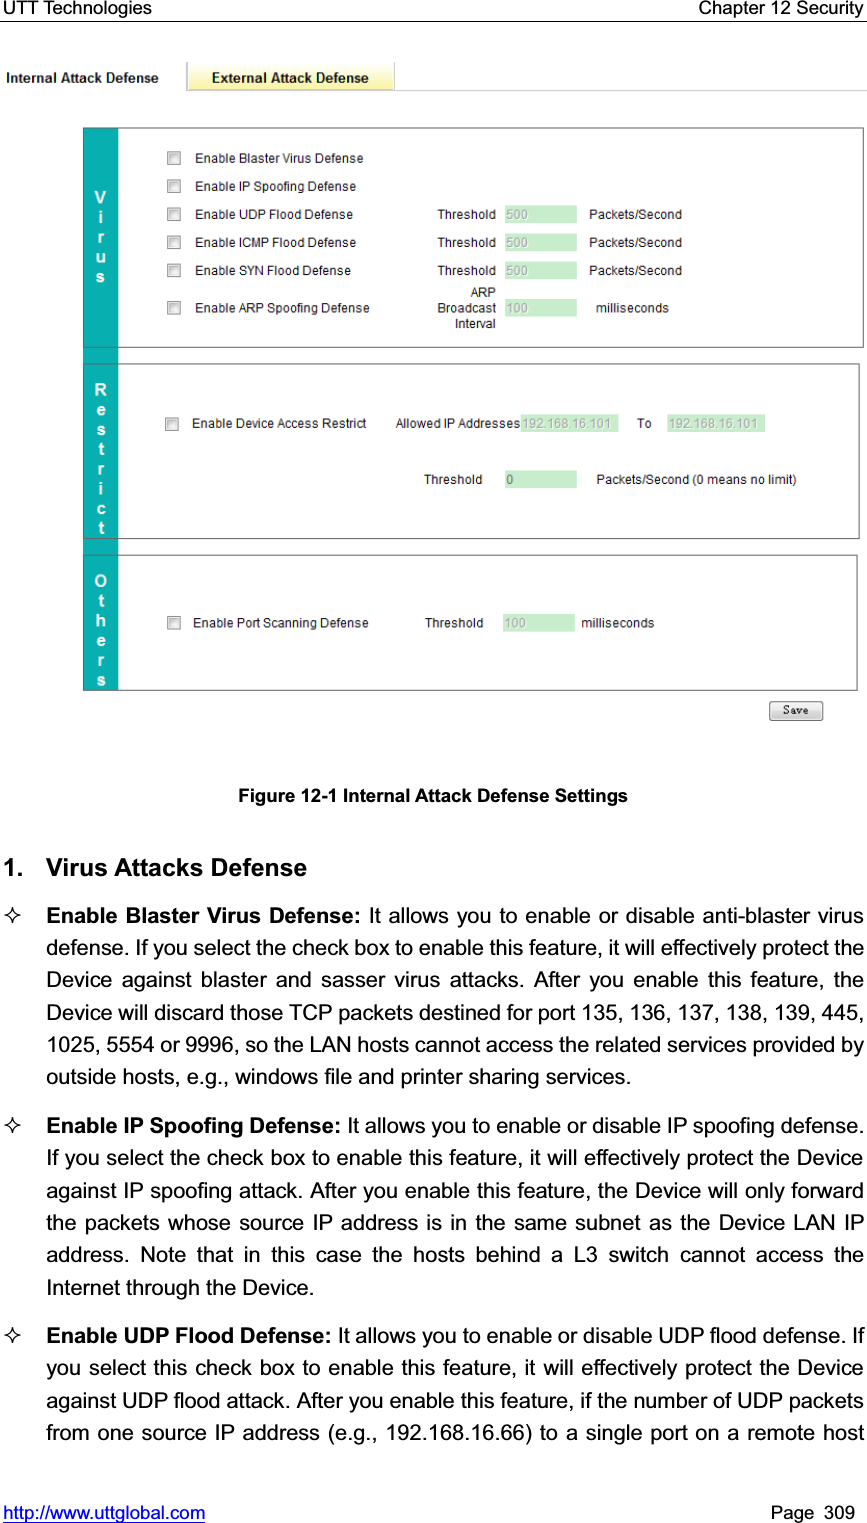 UTT Technologies    Chapter 12 Security   http://www.uttglobal.com Page 309 Figure 12-1 Internal Attack Defense Settings 1. Virus Attacks DefenseEnable Blaster Virus Defense: It allows you to enable or disable anti-blaster virus defense. If you select the check box to enable this feature, it will effectively protect the Device against blaster and sasser virus attacks. After you enable this feature, the Device will discard those TCP packets destined for port 135, 136, 137, 138, 139, 445, 1025, 5554 or 9996, so the LAN hosts cannot access the related services provided by outside hosts, e.g., windows file and printer sharing services.   Enable IP Spoofing Defense: It allows you to enable or disable IP spoofing defense. If you select the check box to enable this feature, it will effectively protect the Device against IP spoofing attack. After you enable this feature, the Device will only forward the packets whose source IP address is in the same subnet as the Device LAN IP address. Note that in this case the hosts behind a L3 switch cannot access the Internet through the Device.   Enable UDP Flood Defense: It allows you to enable or disable UDP flood defense. If you select this check box to enable this feature, it will effectively protect the Device against UDP flood attack. After you enable this feature, if the number of UDP packets from one source IP address (e.g., 192.168.16.66) to a single port on a remote host 